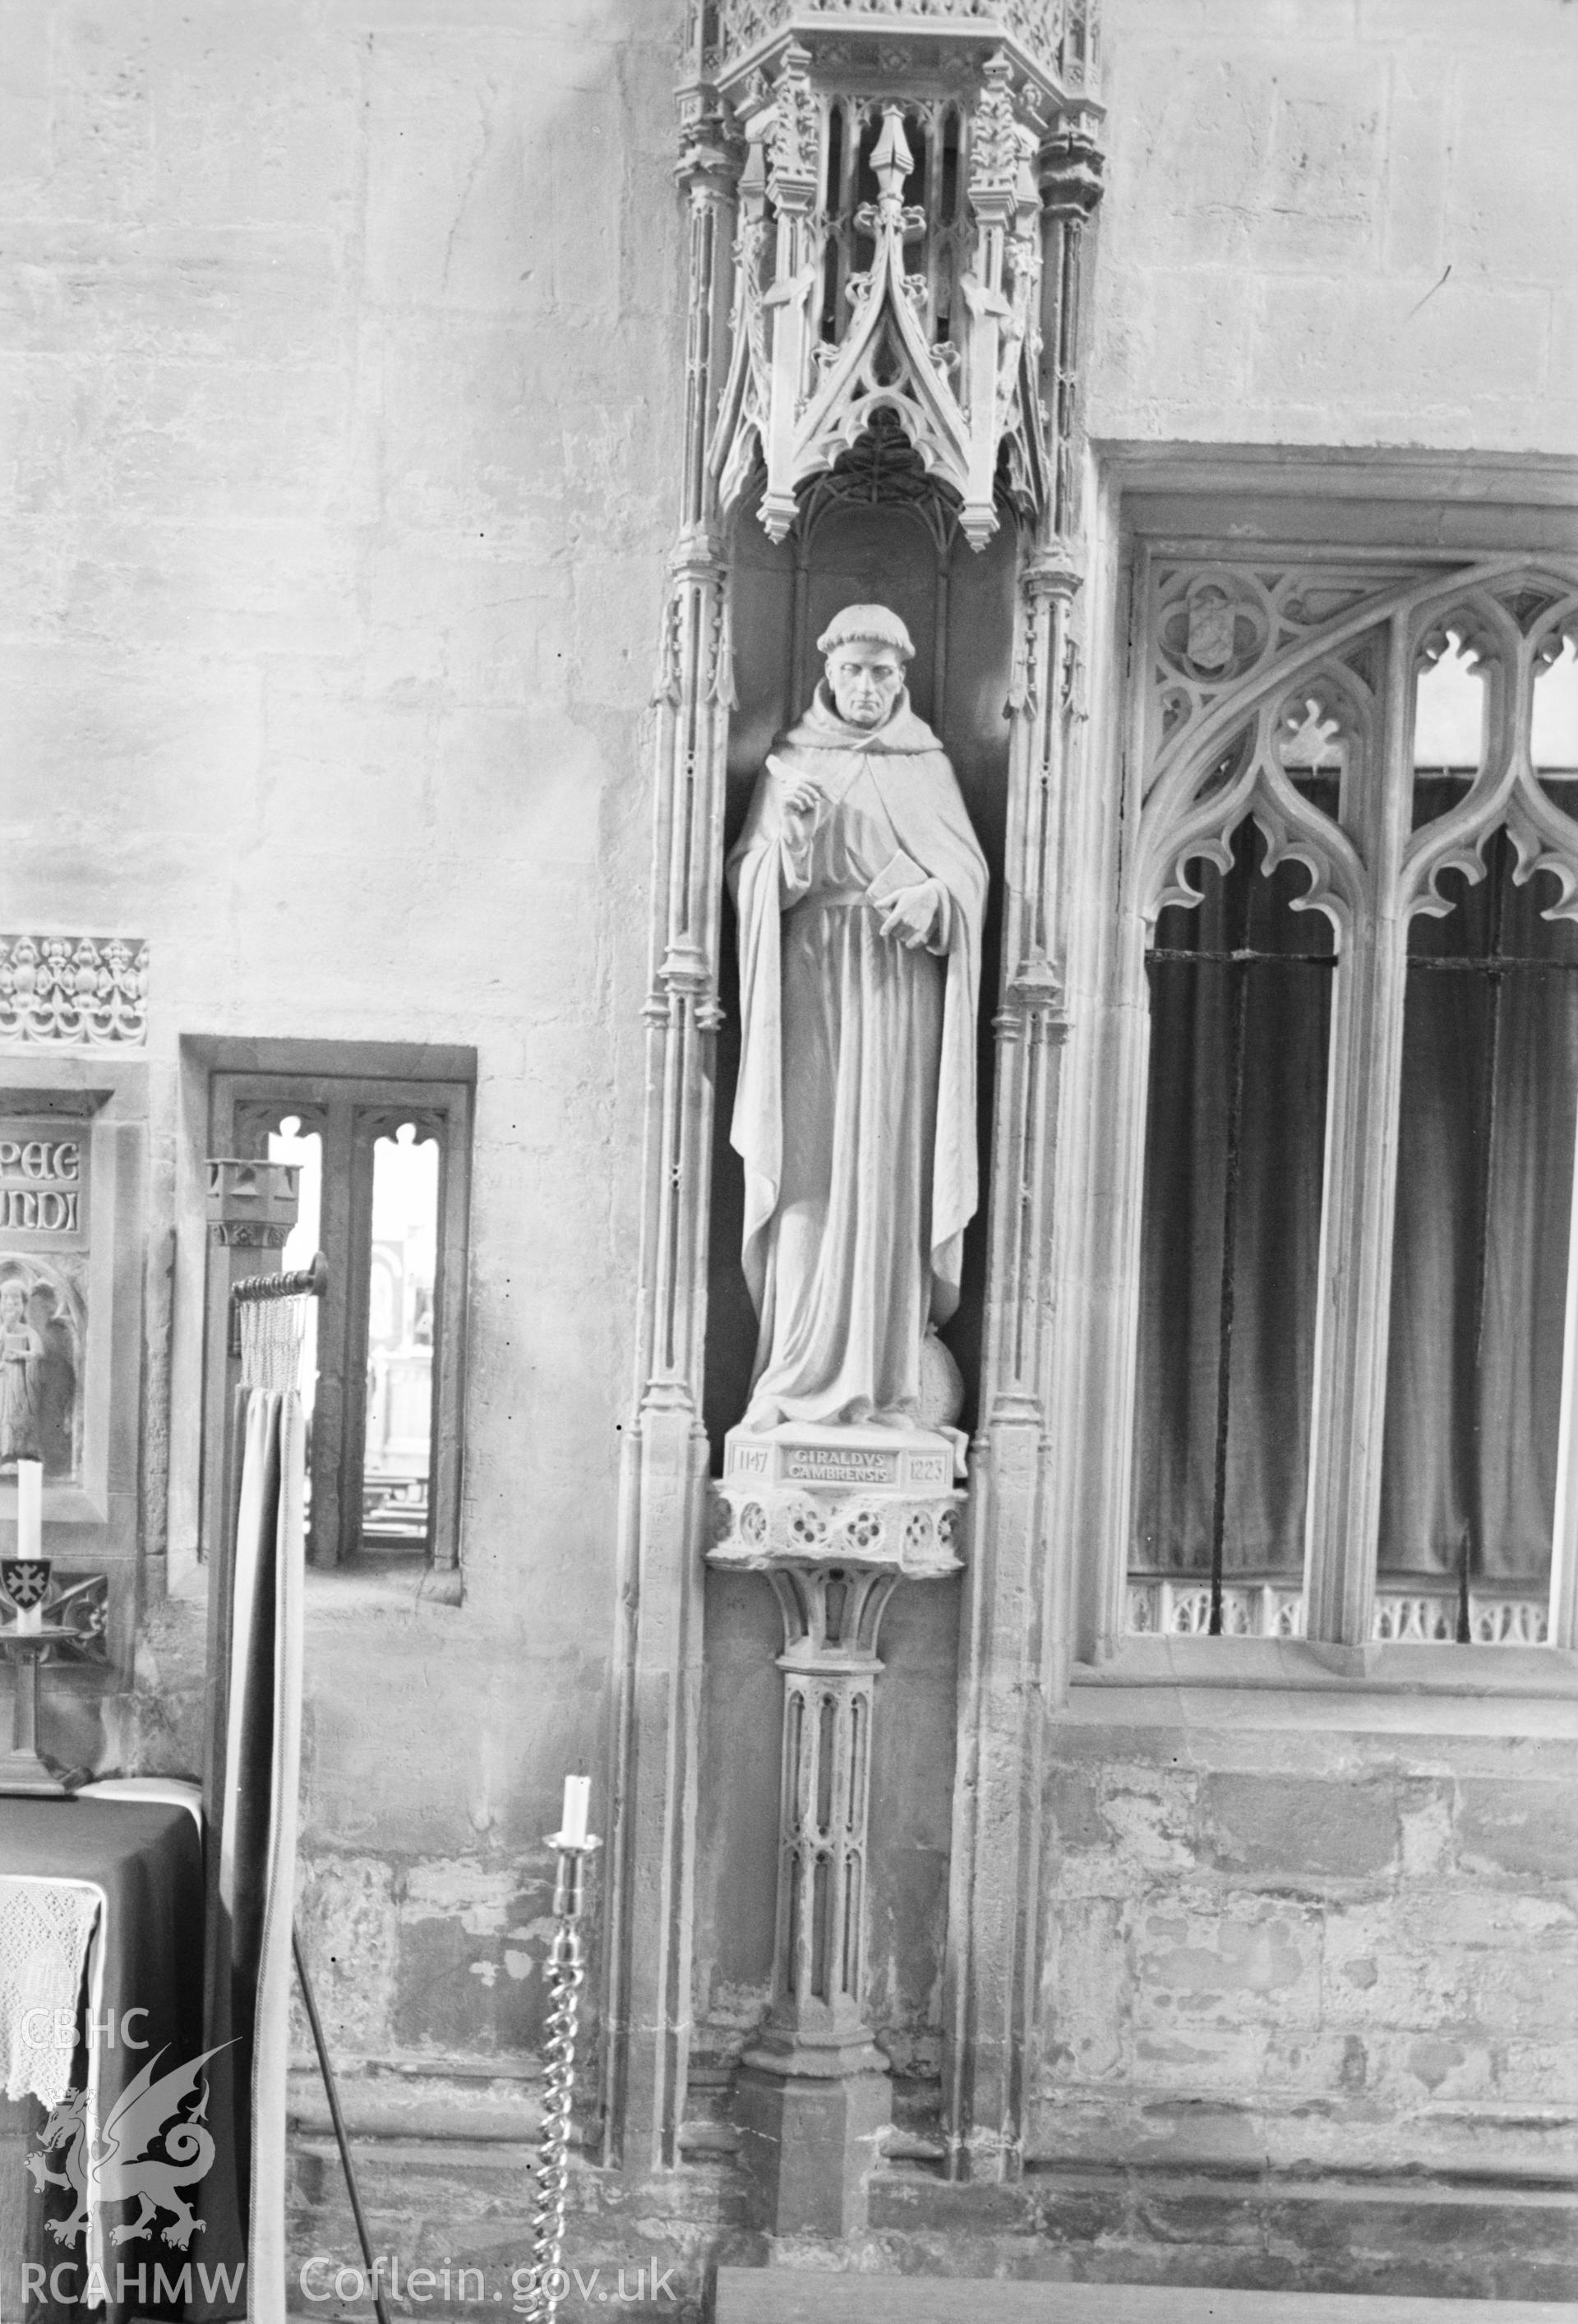 Black and white nitrate negative showing interior view at St David's Cathedral.